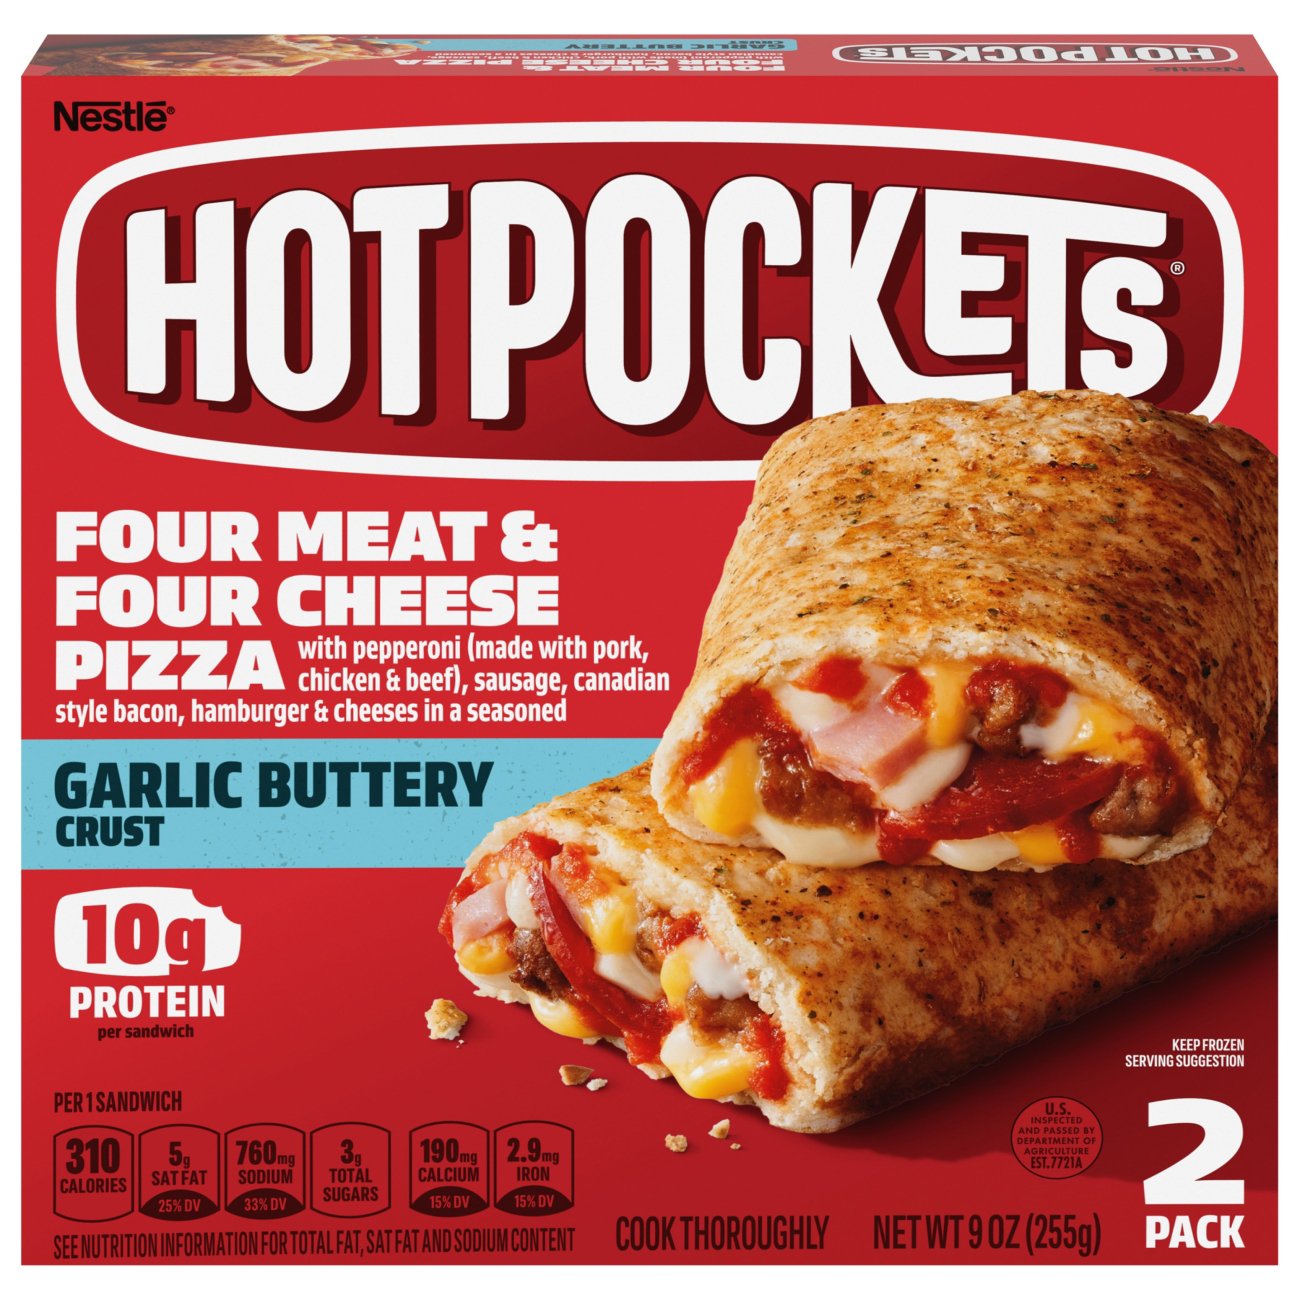 Hot Pockets Included in Massive Meat Recall